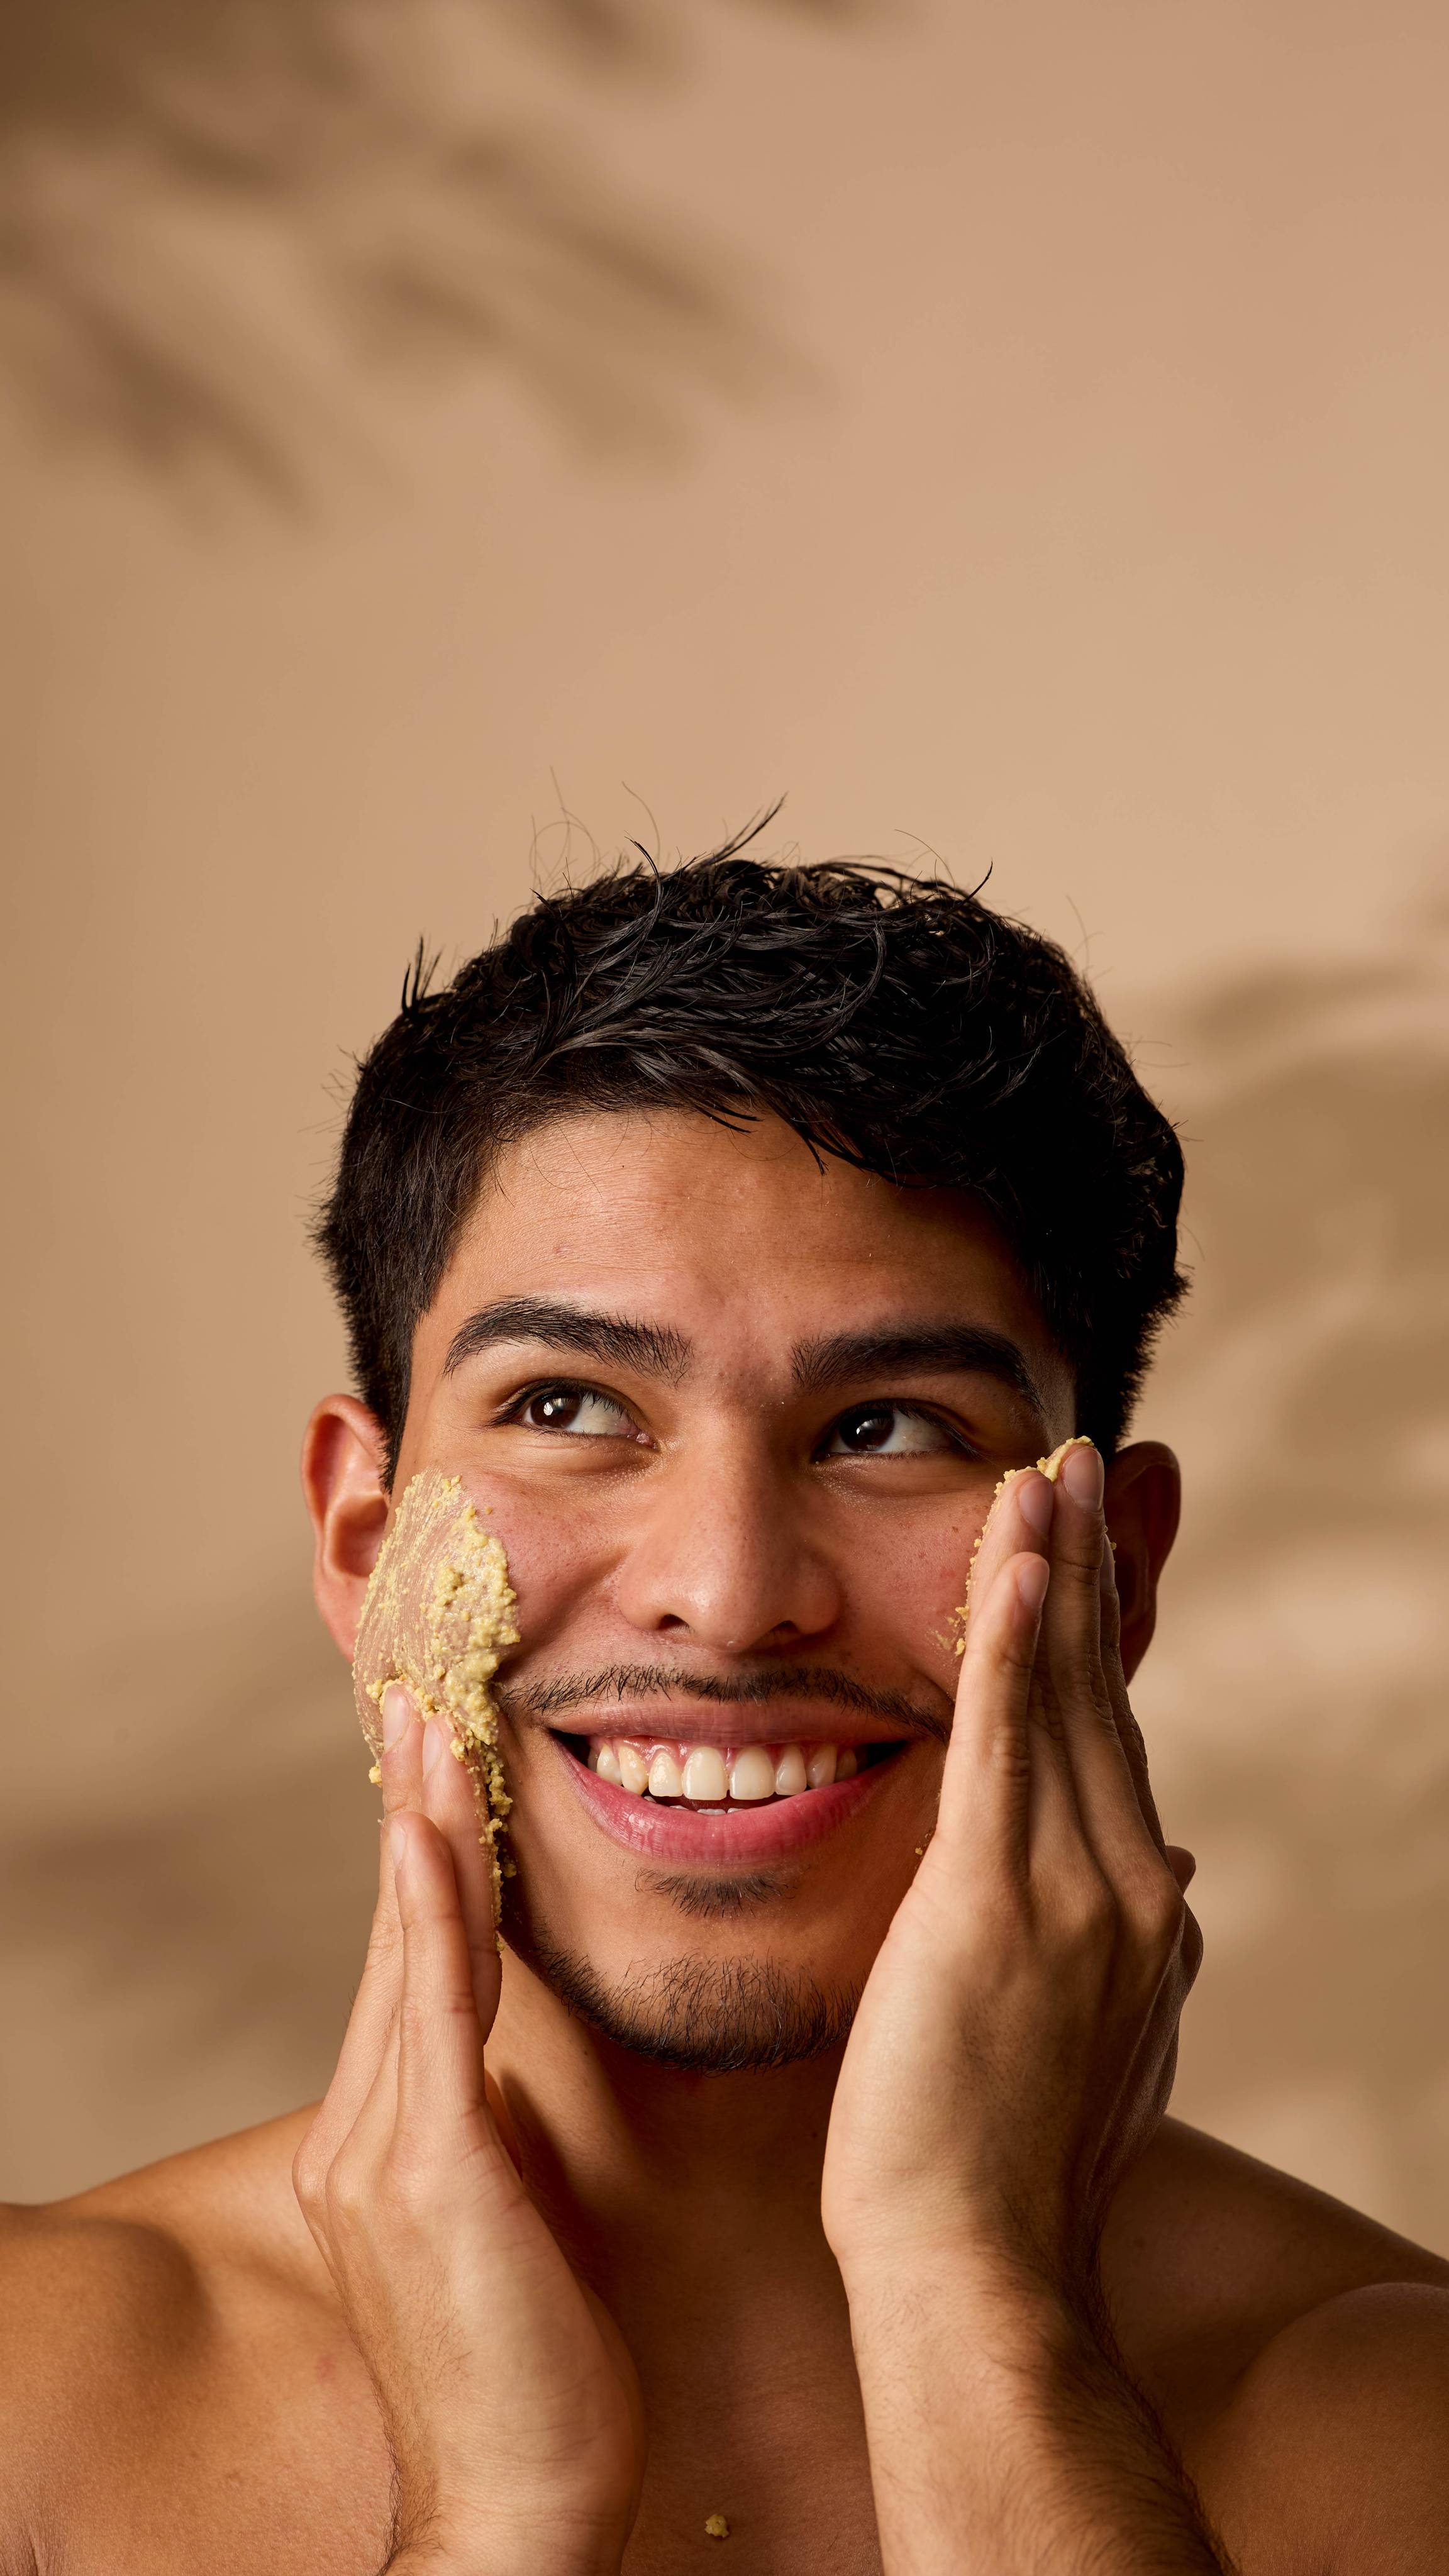 The model is smiling and looking upward as they apply the Turmeric Roll cleanser to both cheeks under warm lighting. 